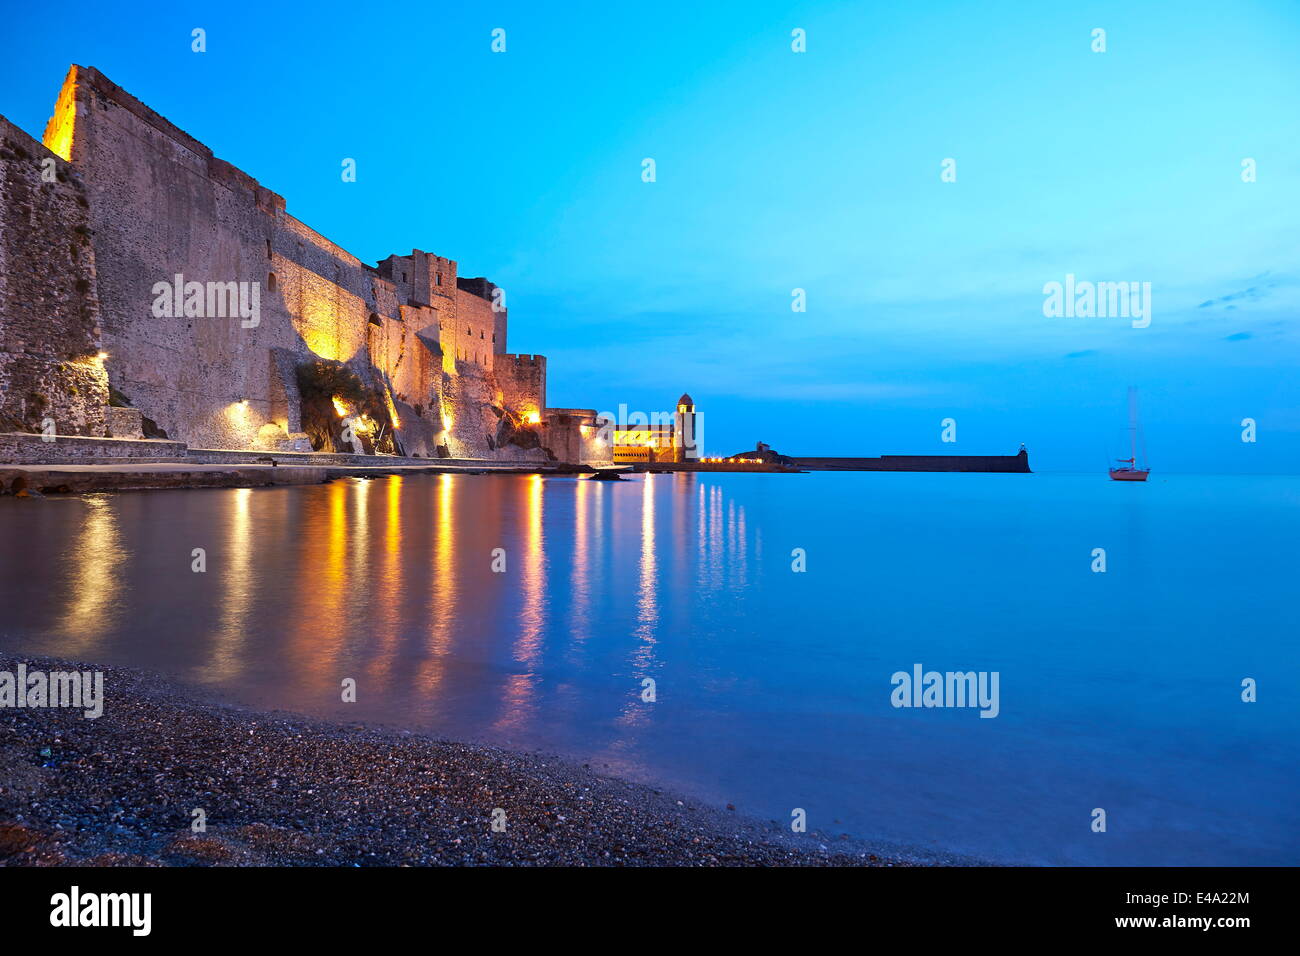 Chateau Royale, Collioure, Languedoc-Roussillon, France, Mediterranean, Europe Stock Photo